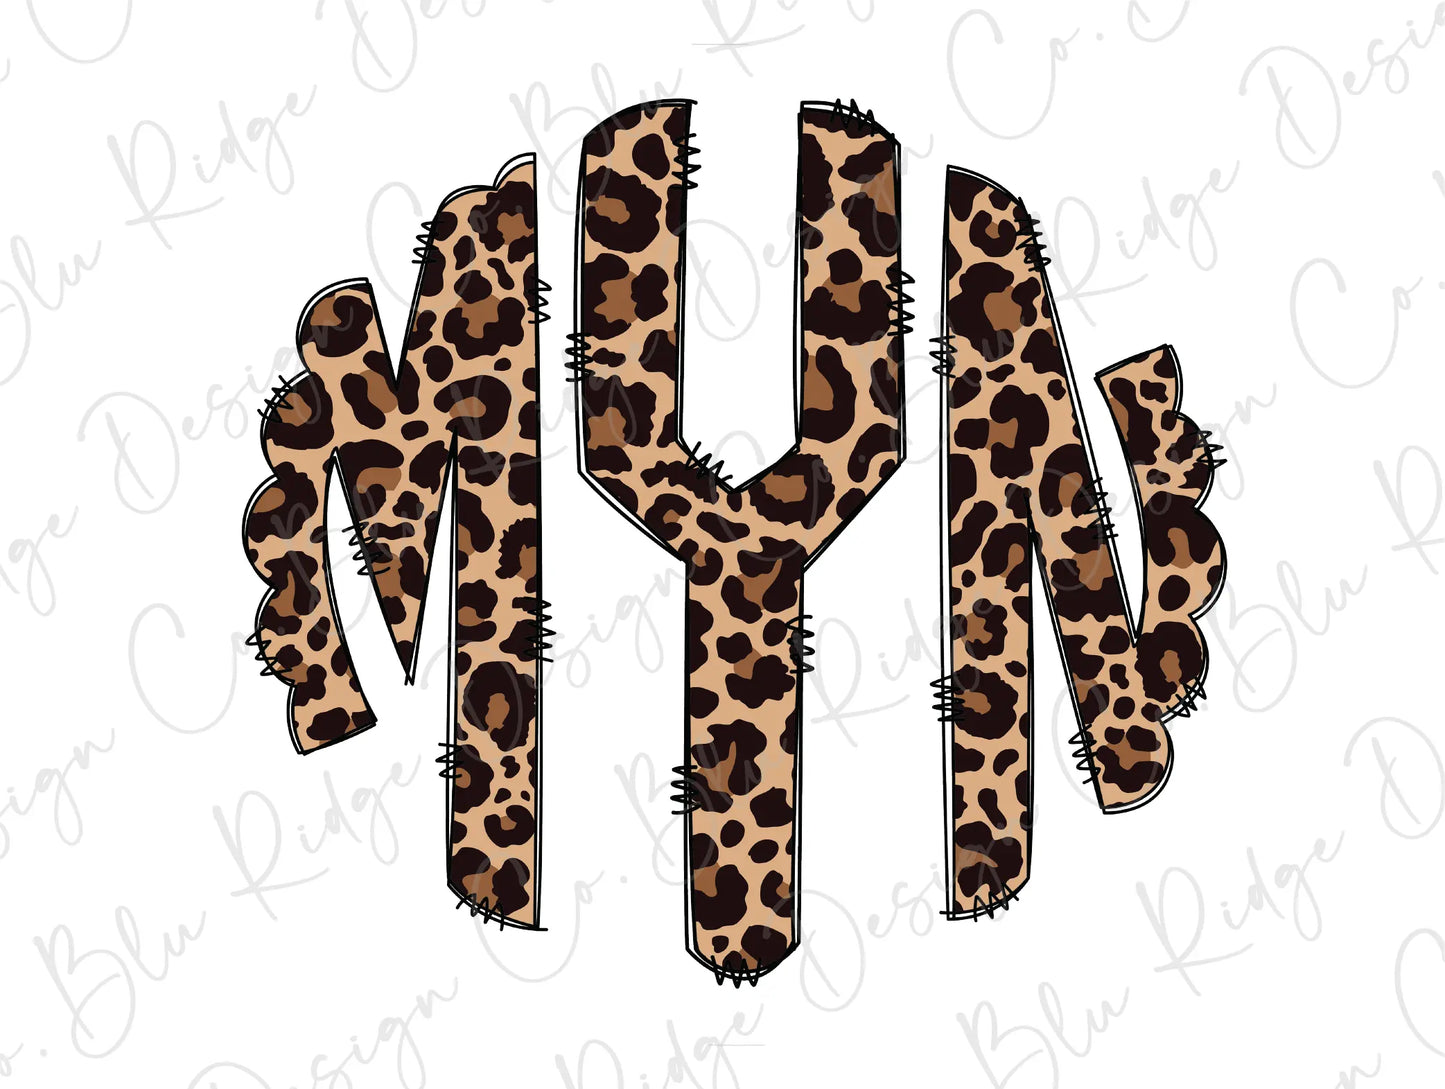 the letters y and y are made up of leopard print